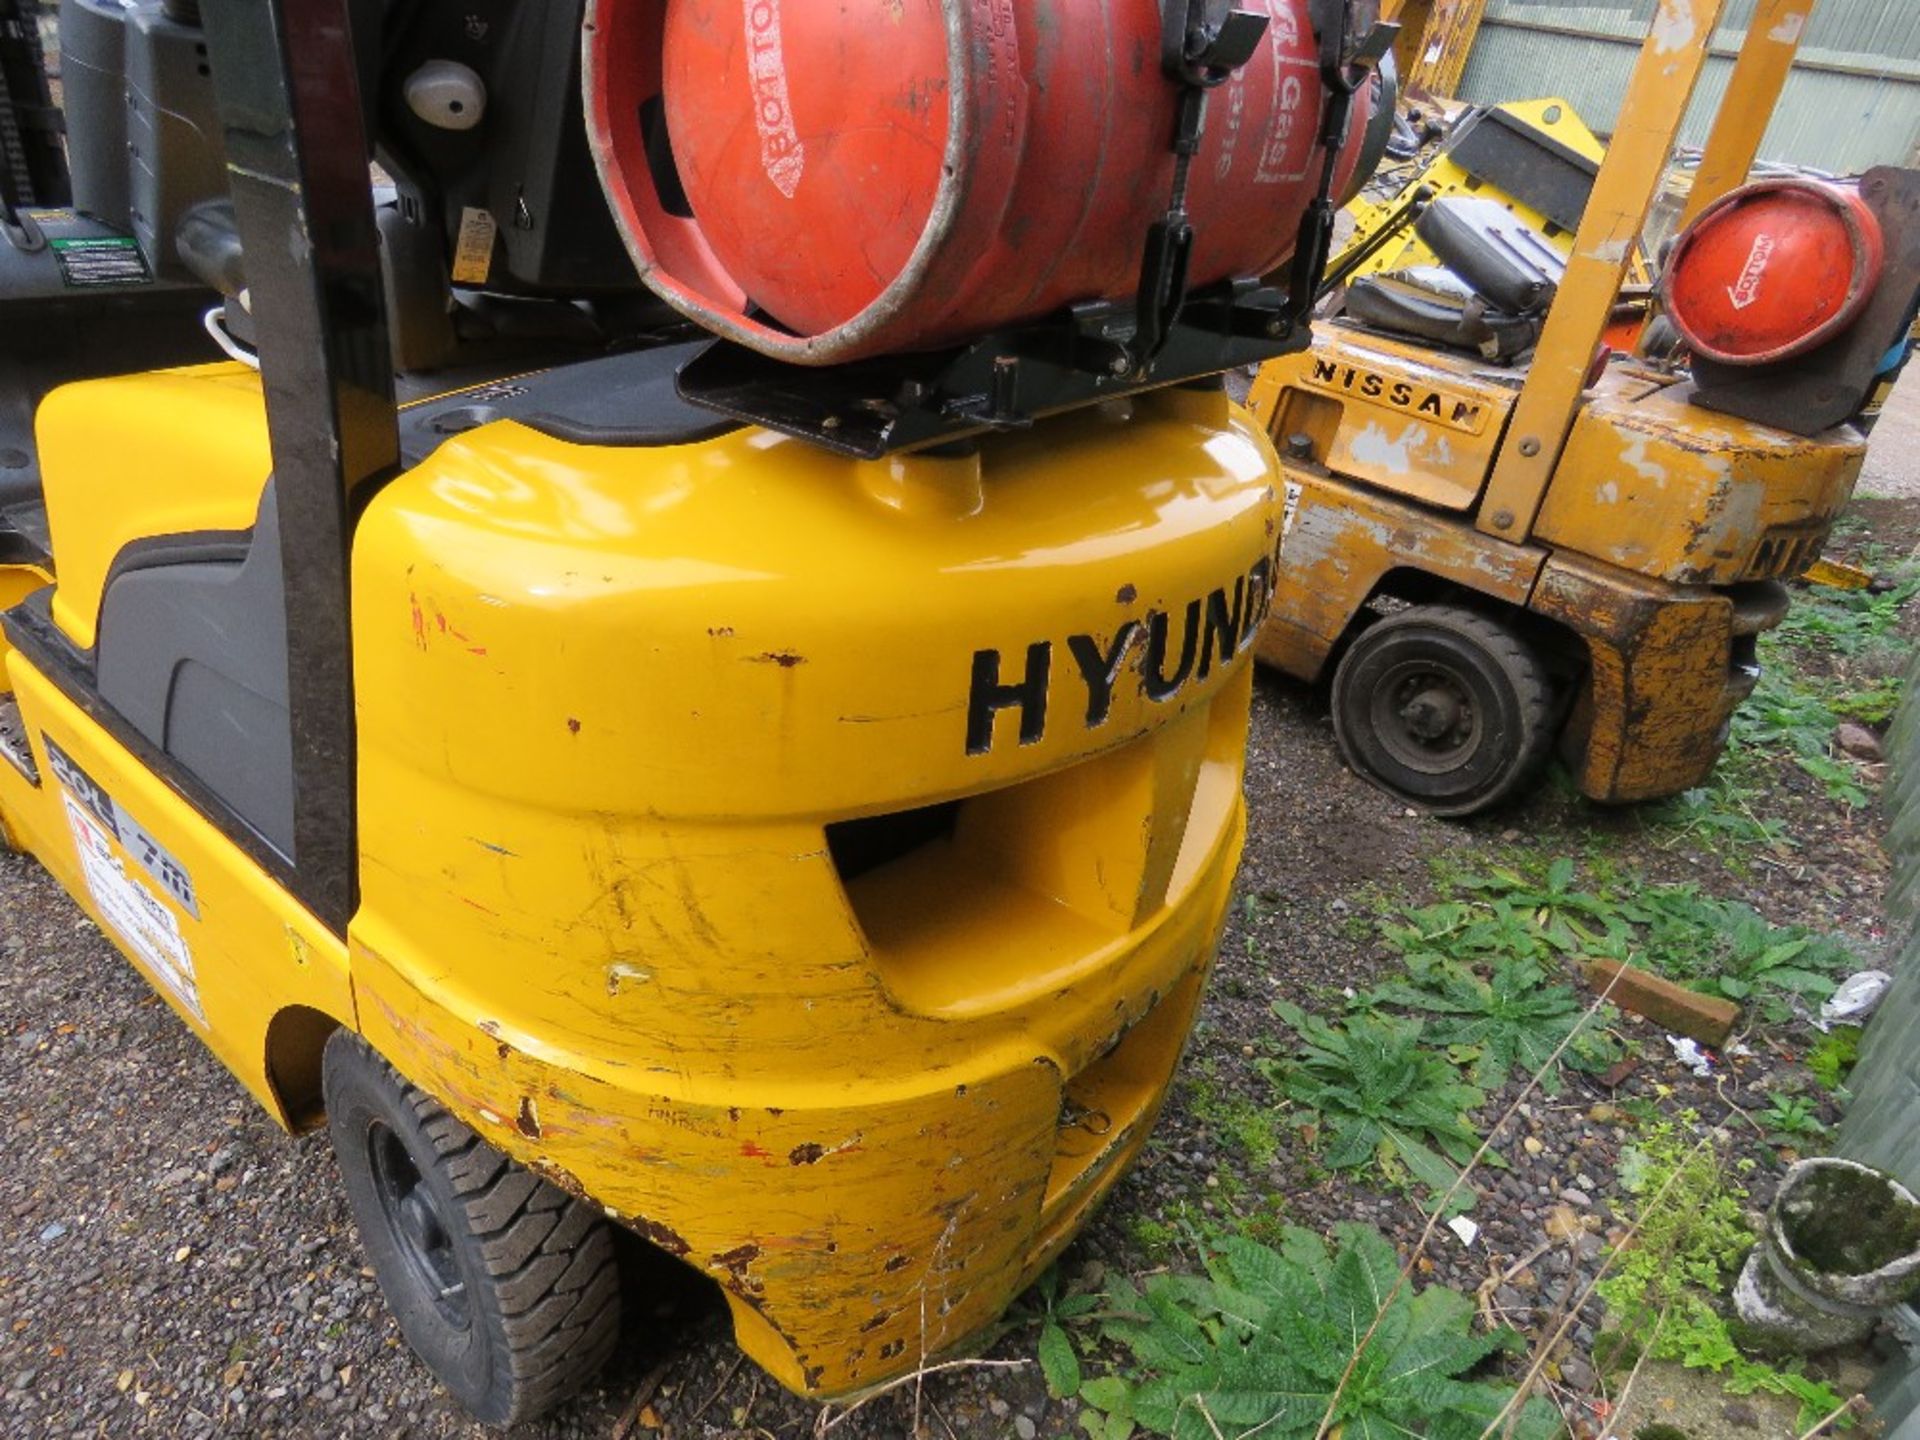 HYUNDAI 20L-7M GAS POWERED 2 TONNE FORKLIFT TRUCK. YEAR 2018 BUILD, LITTLE USED RECENTLY. - Image 6 of 12